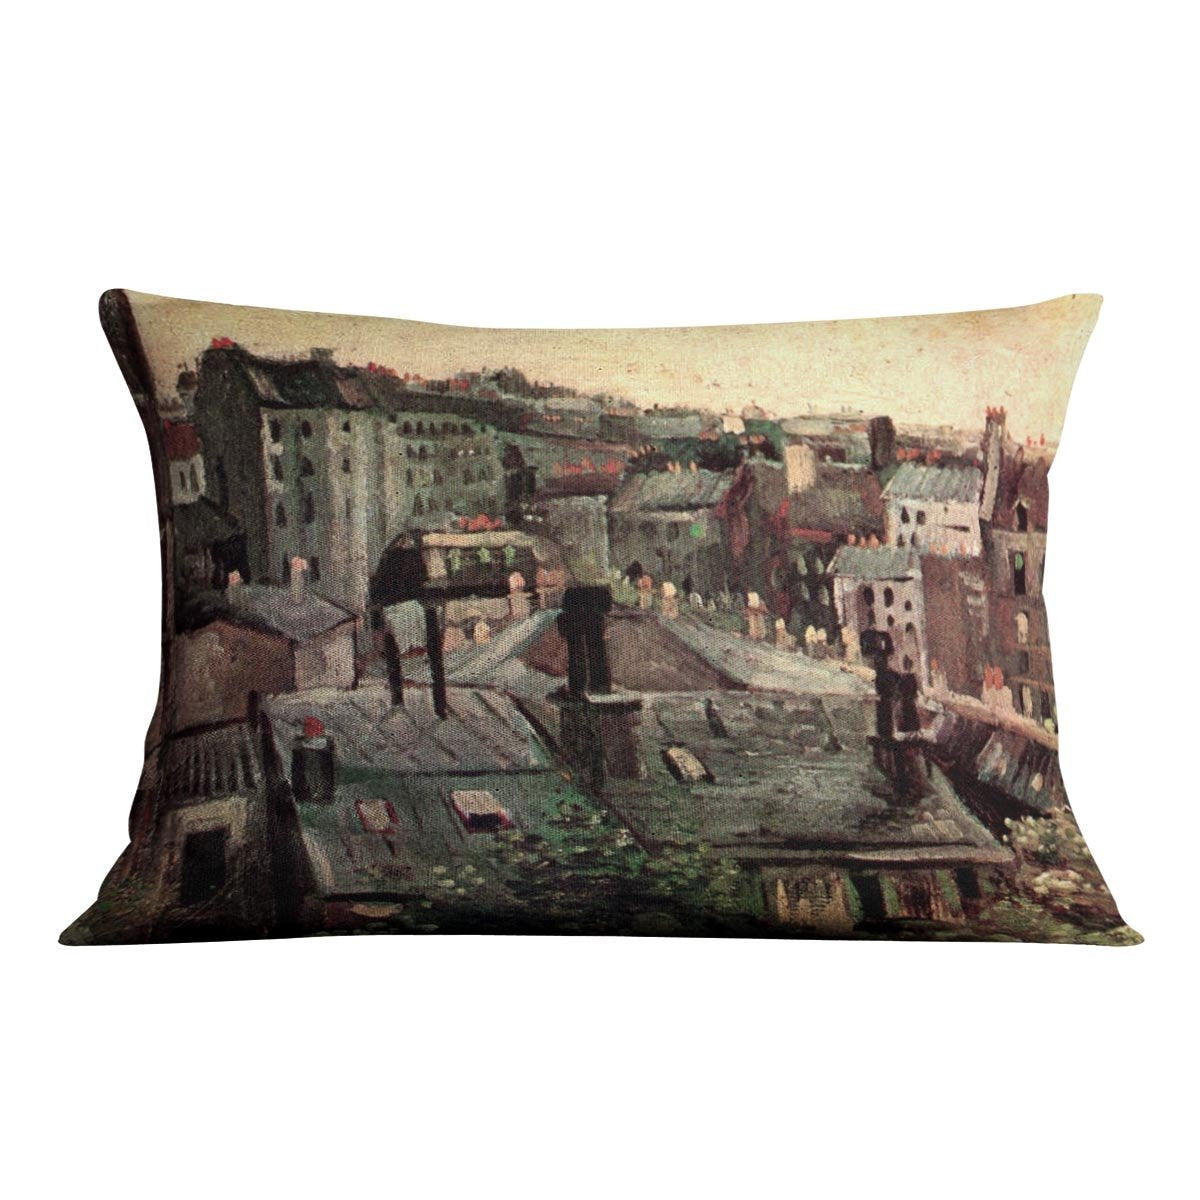 View of Roofs and Backs of Houses by Van Gogh Throw Pillow